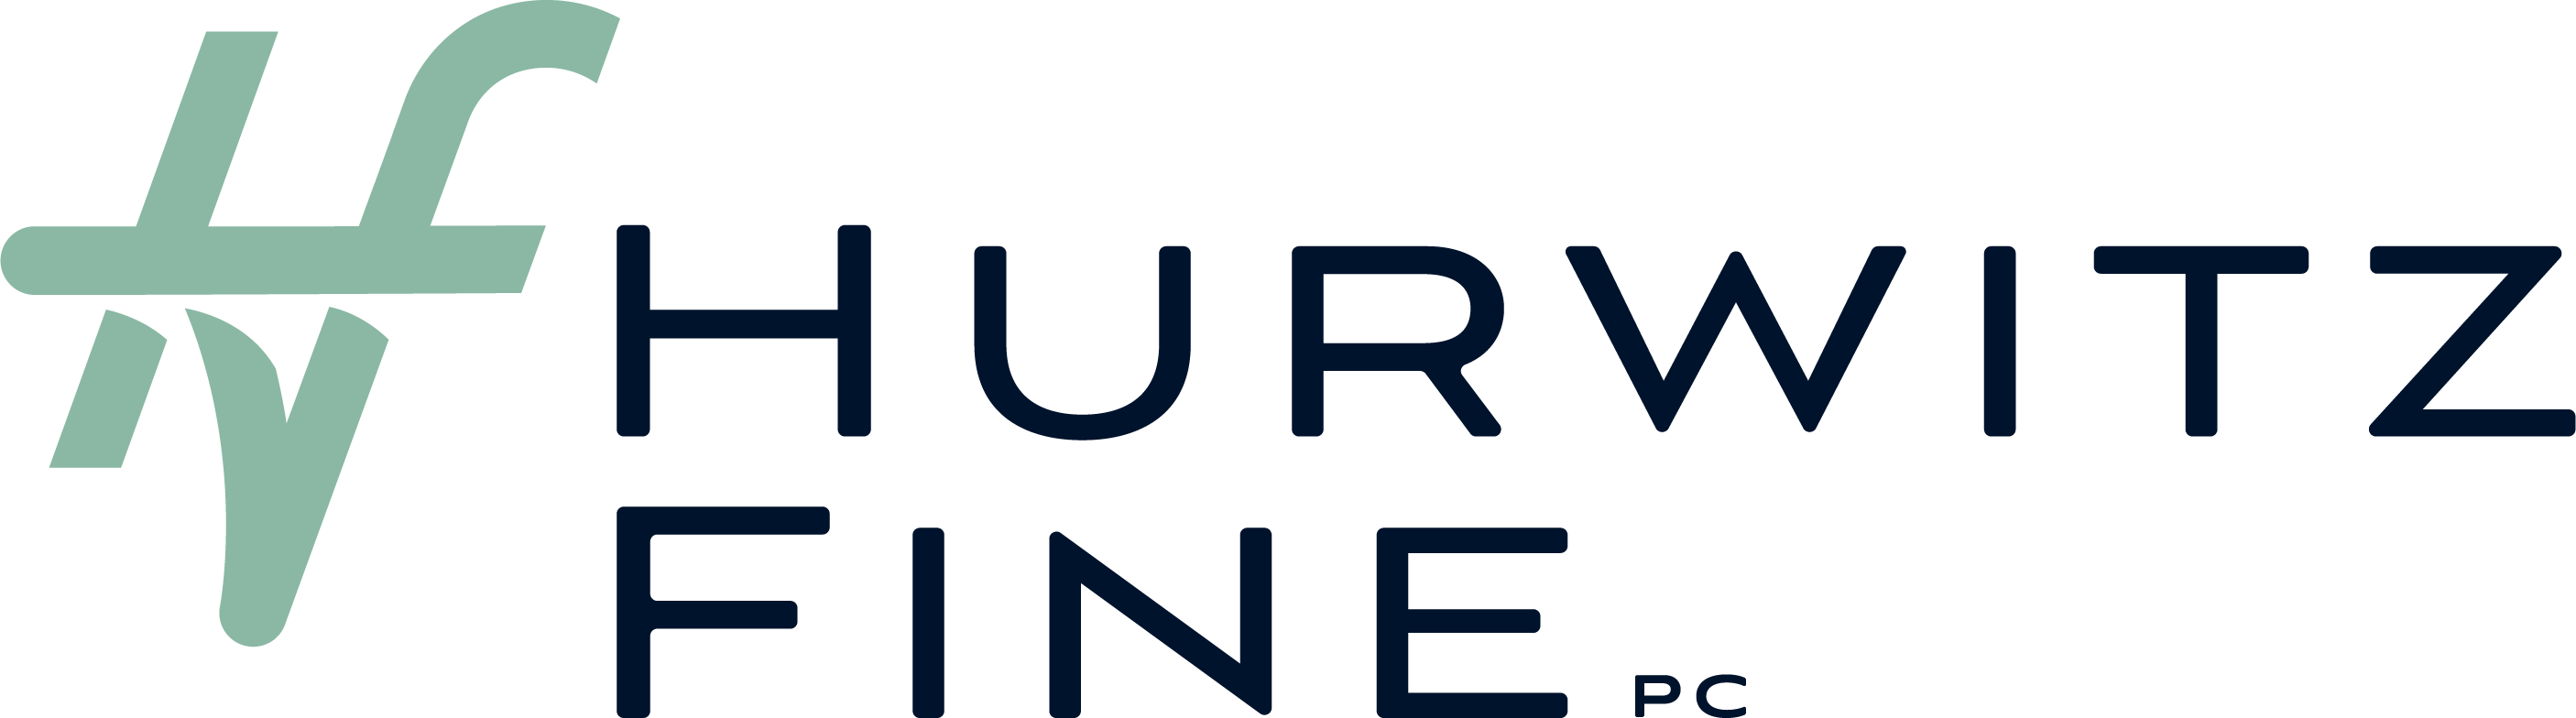 Hurwitz & Fine, P.C. Ranked as a Tier One Law Firm in Seven Practice Areas in 2020 U.S. News & World Report and Best Lawyers Placeholder Image